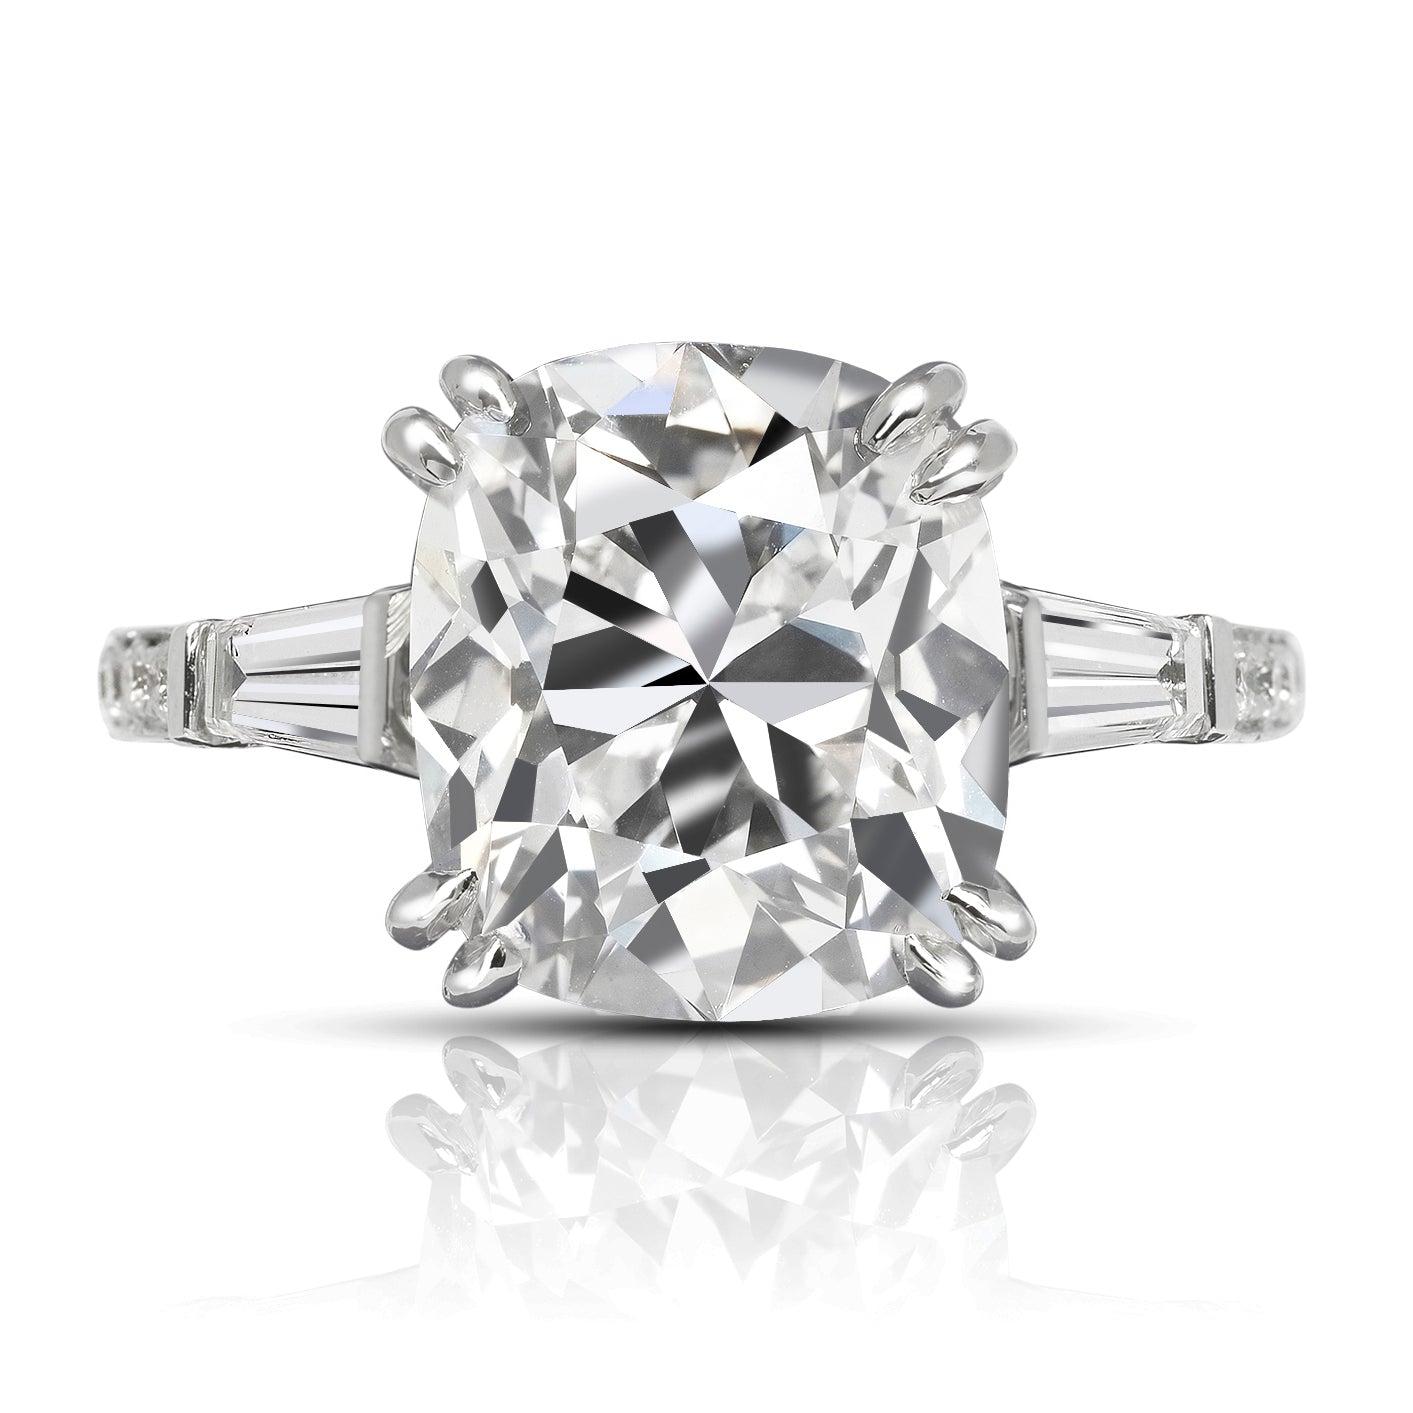 ARIA DIAMOND ENGAGEMENT PLATINUM RING BY MIKE NEKTA
GIA CERTIFIED

Center Diamond:
Carat Weight: 5.8 Carat
Color: E* 
Clarity: VVS1
Style: CUSHION
Approximate Measurements: 11.3 x 10 x 6.7 mm
* This diamond has been treated by one or more processes